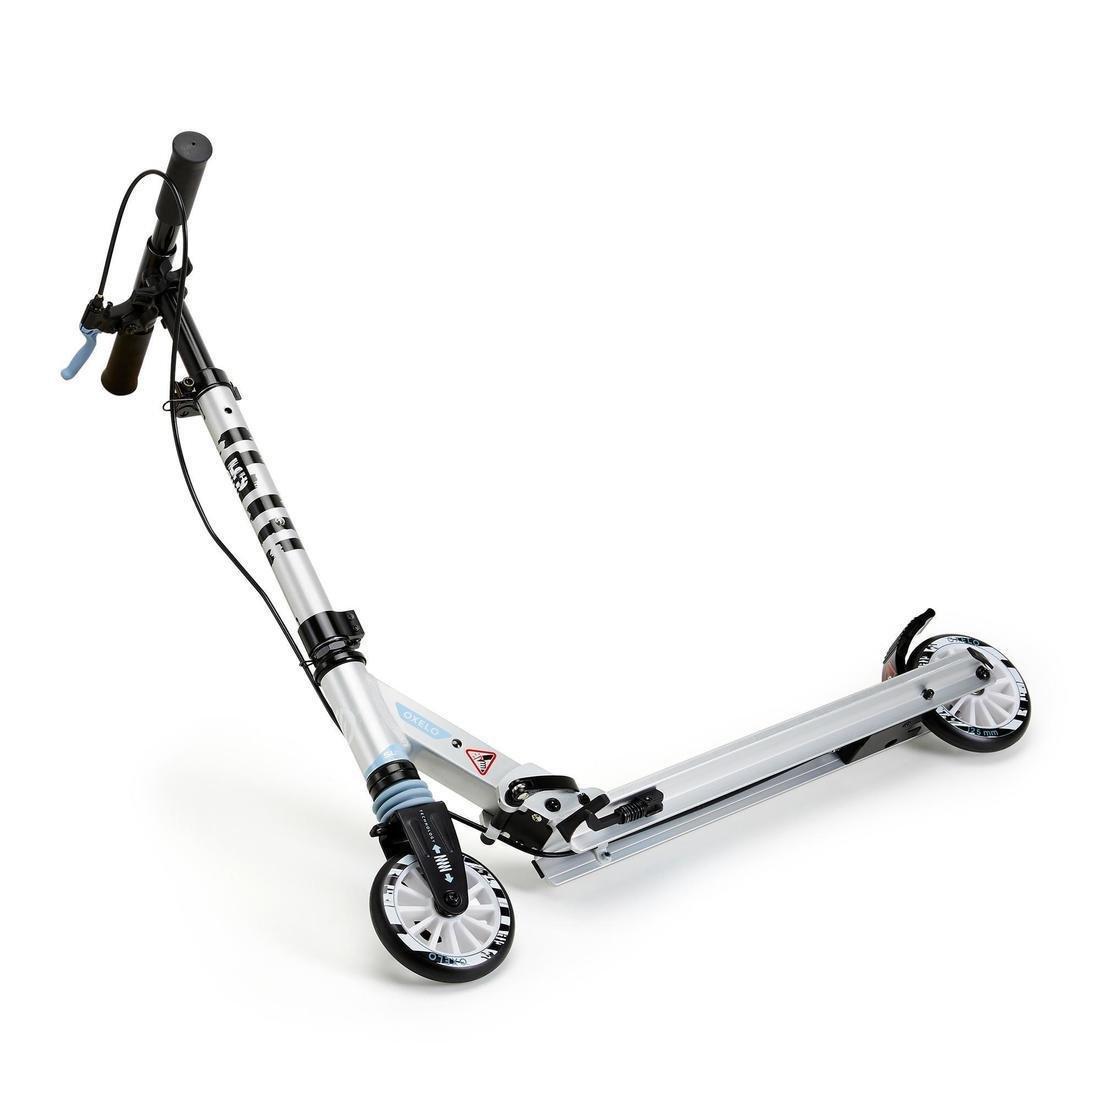 OXELO - MID5 Kids' Scooter with Handlebar Brake and Suspension, Tribal Graphic, Blue